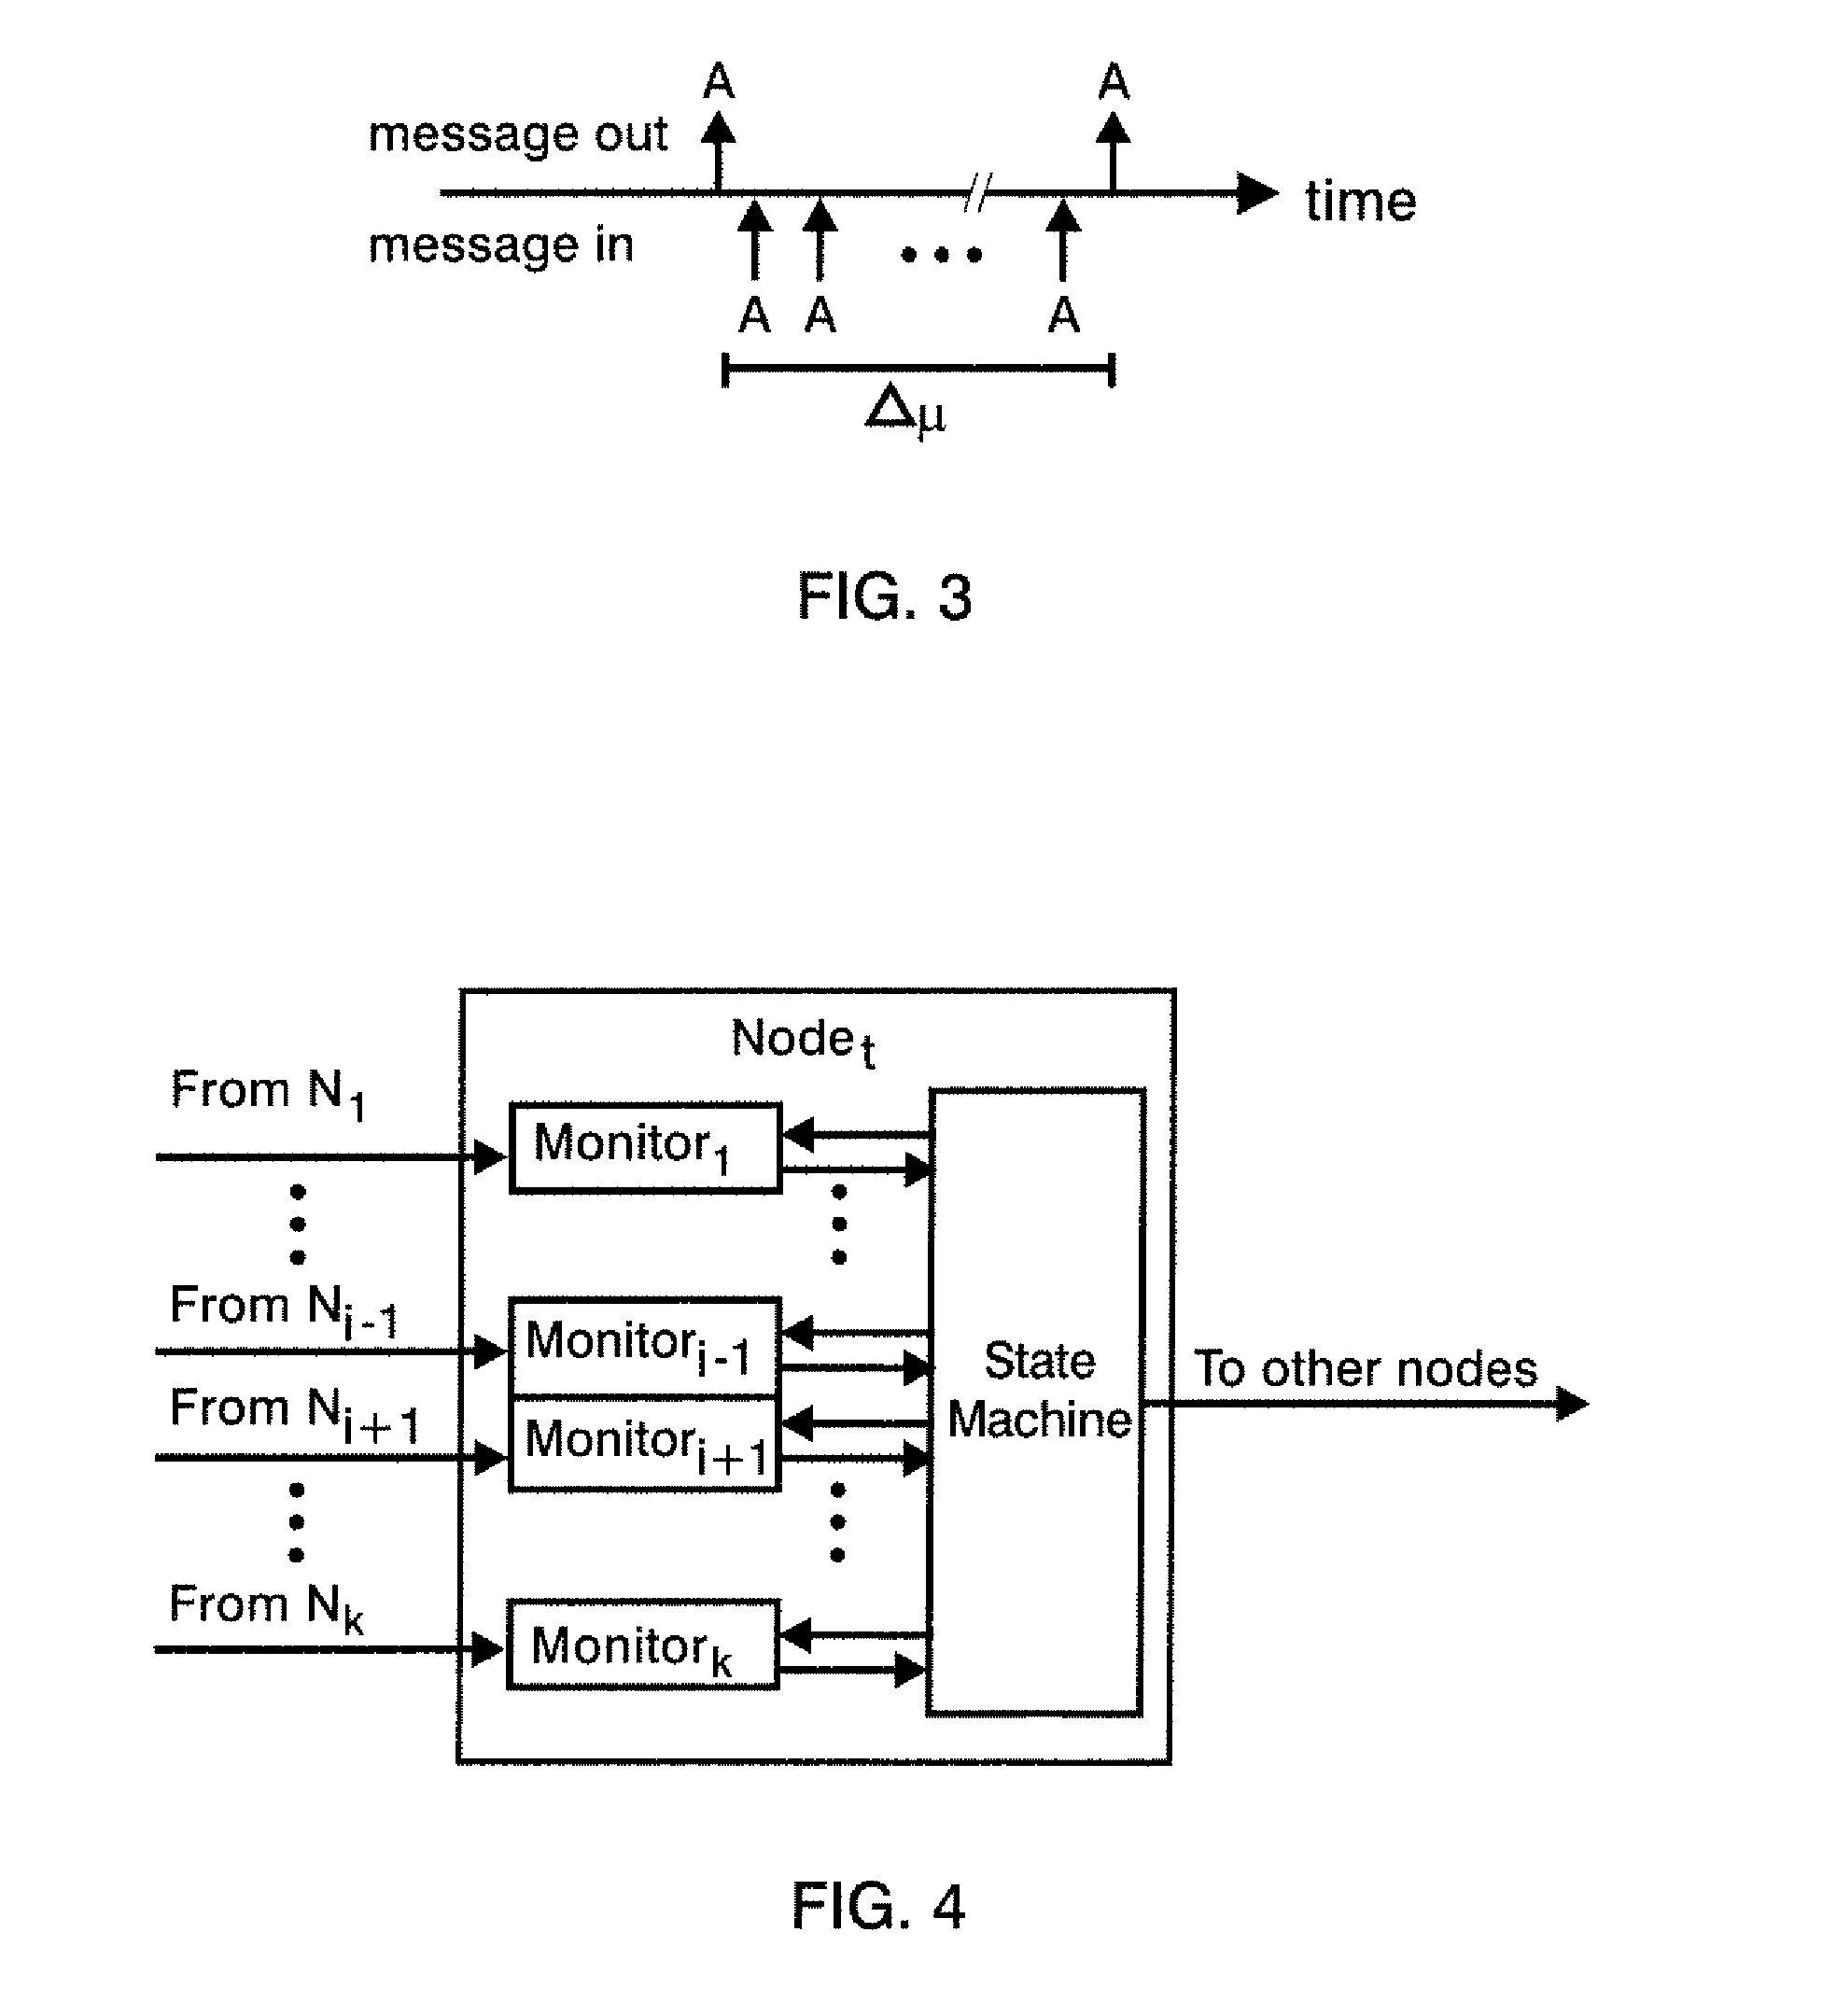 Byzantine-fault tolerant self-stabilizing protocol for distributed clock synchronization systems